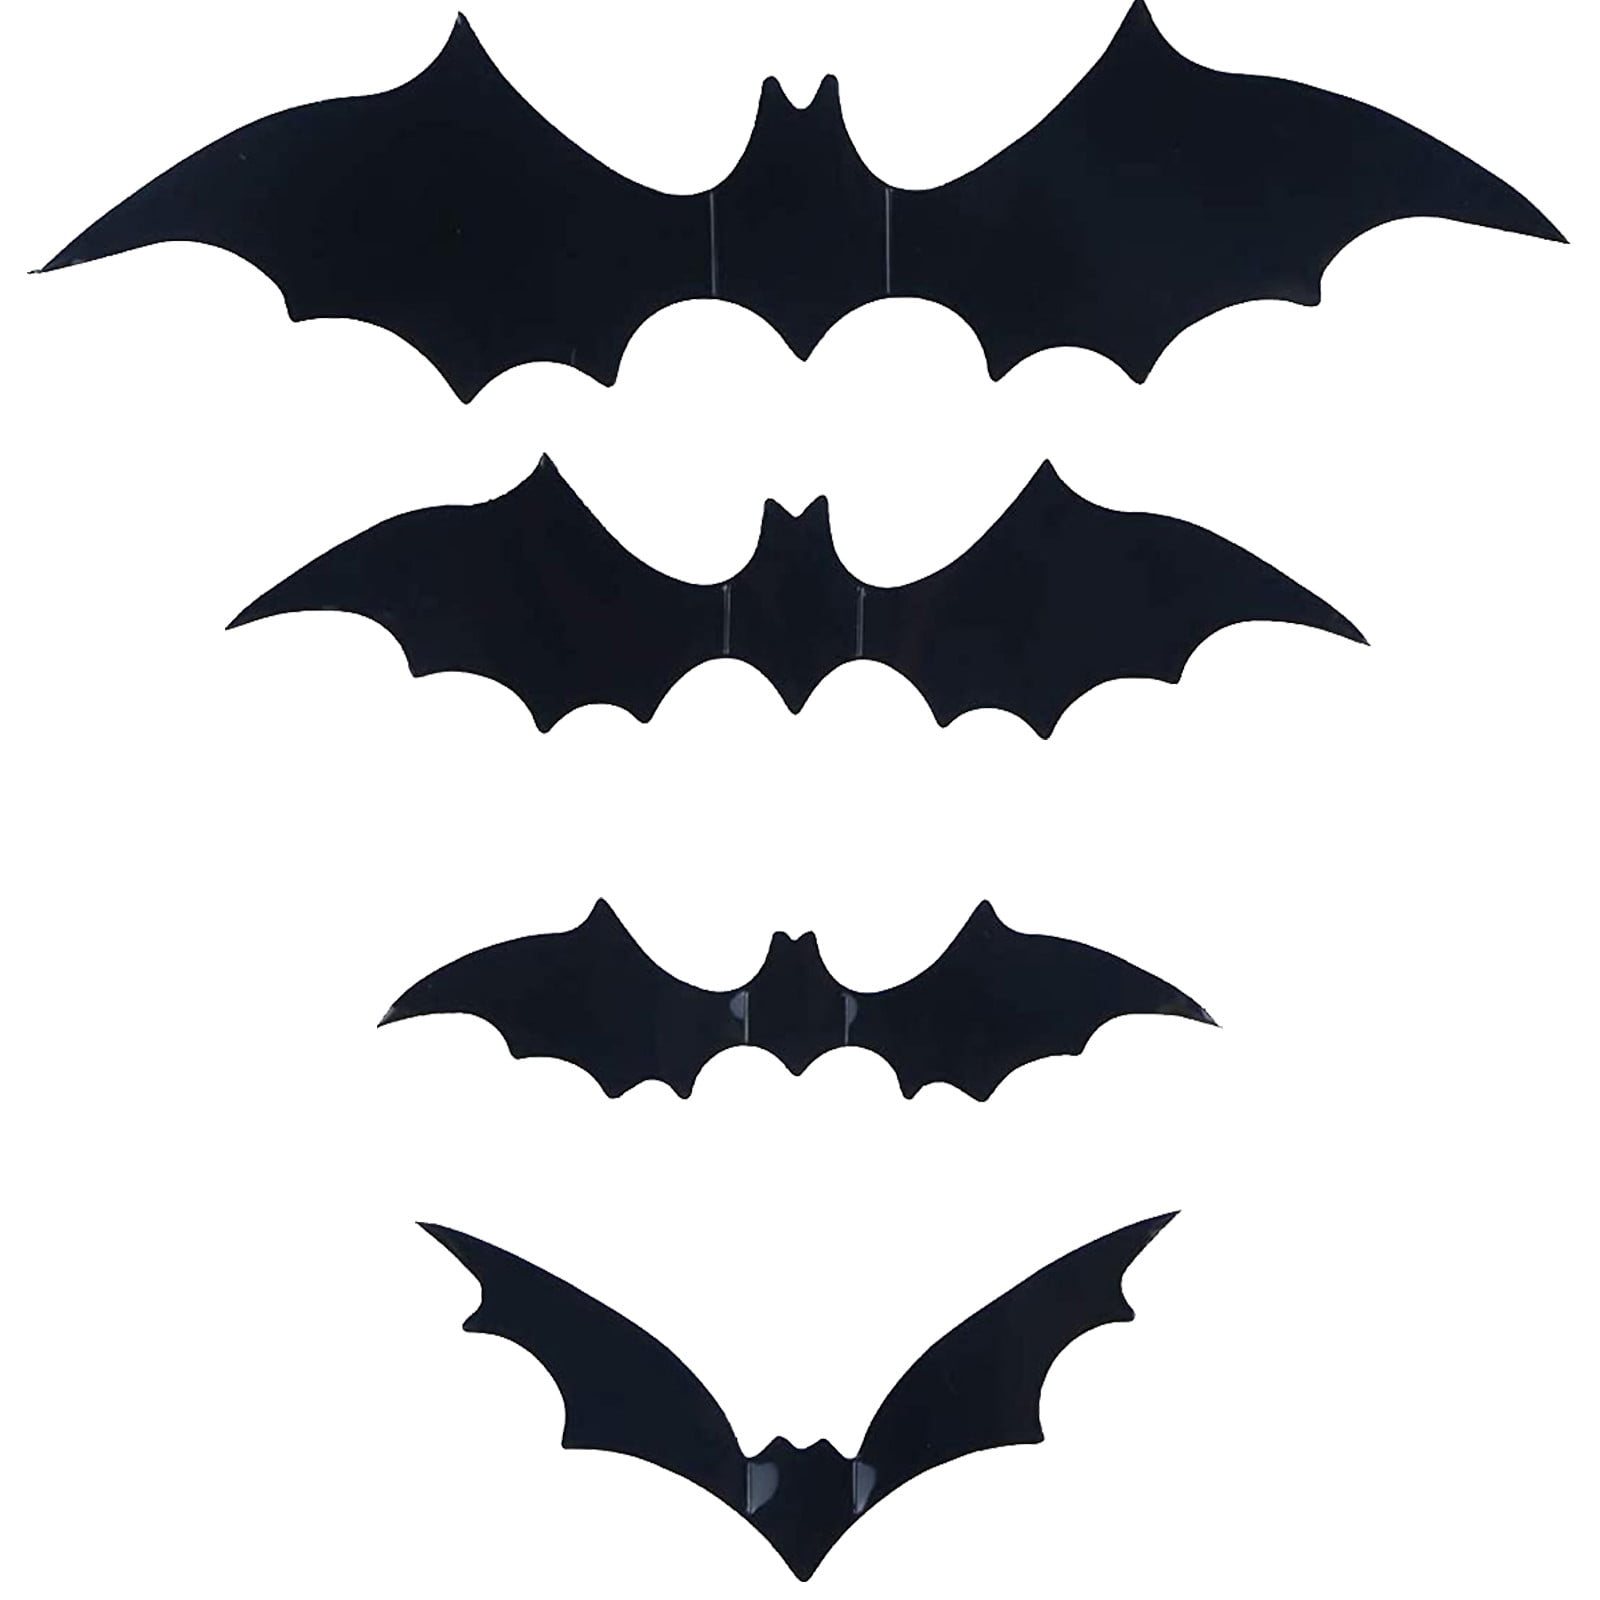 Removable Bats Stickers for Indoor Outdoor Halloween Wall Decorations Halloween Party Supplies Waterproof Scary Bats Wall Decor DIY Home Window Decor 120 Pcs 3D Bats Stickers